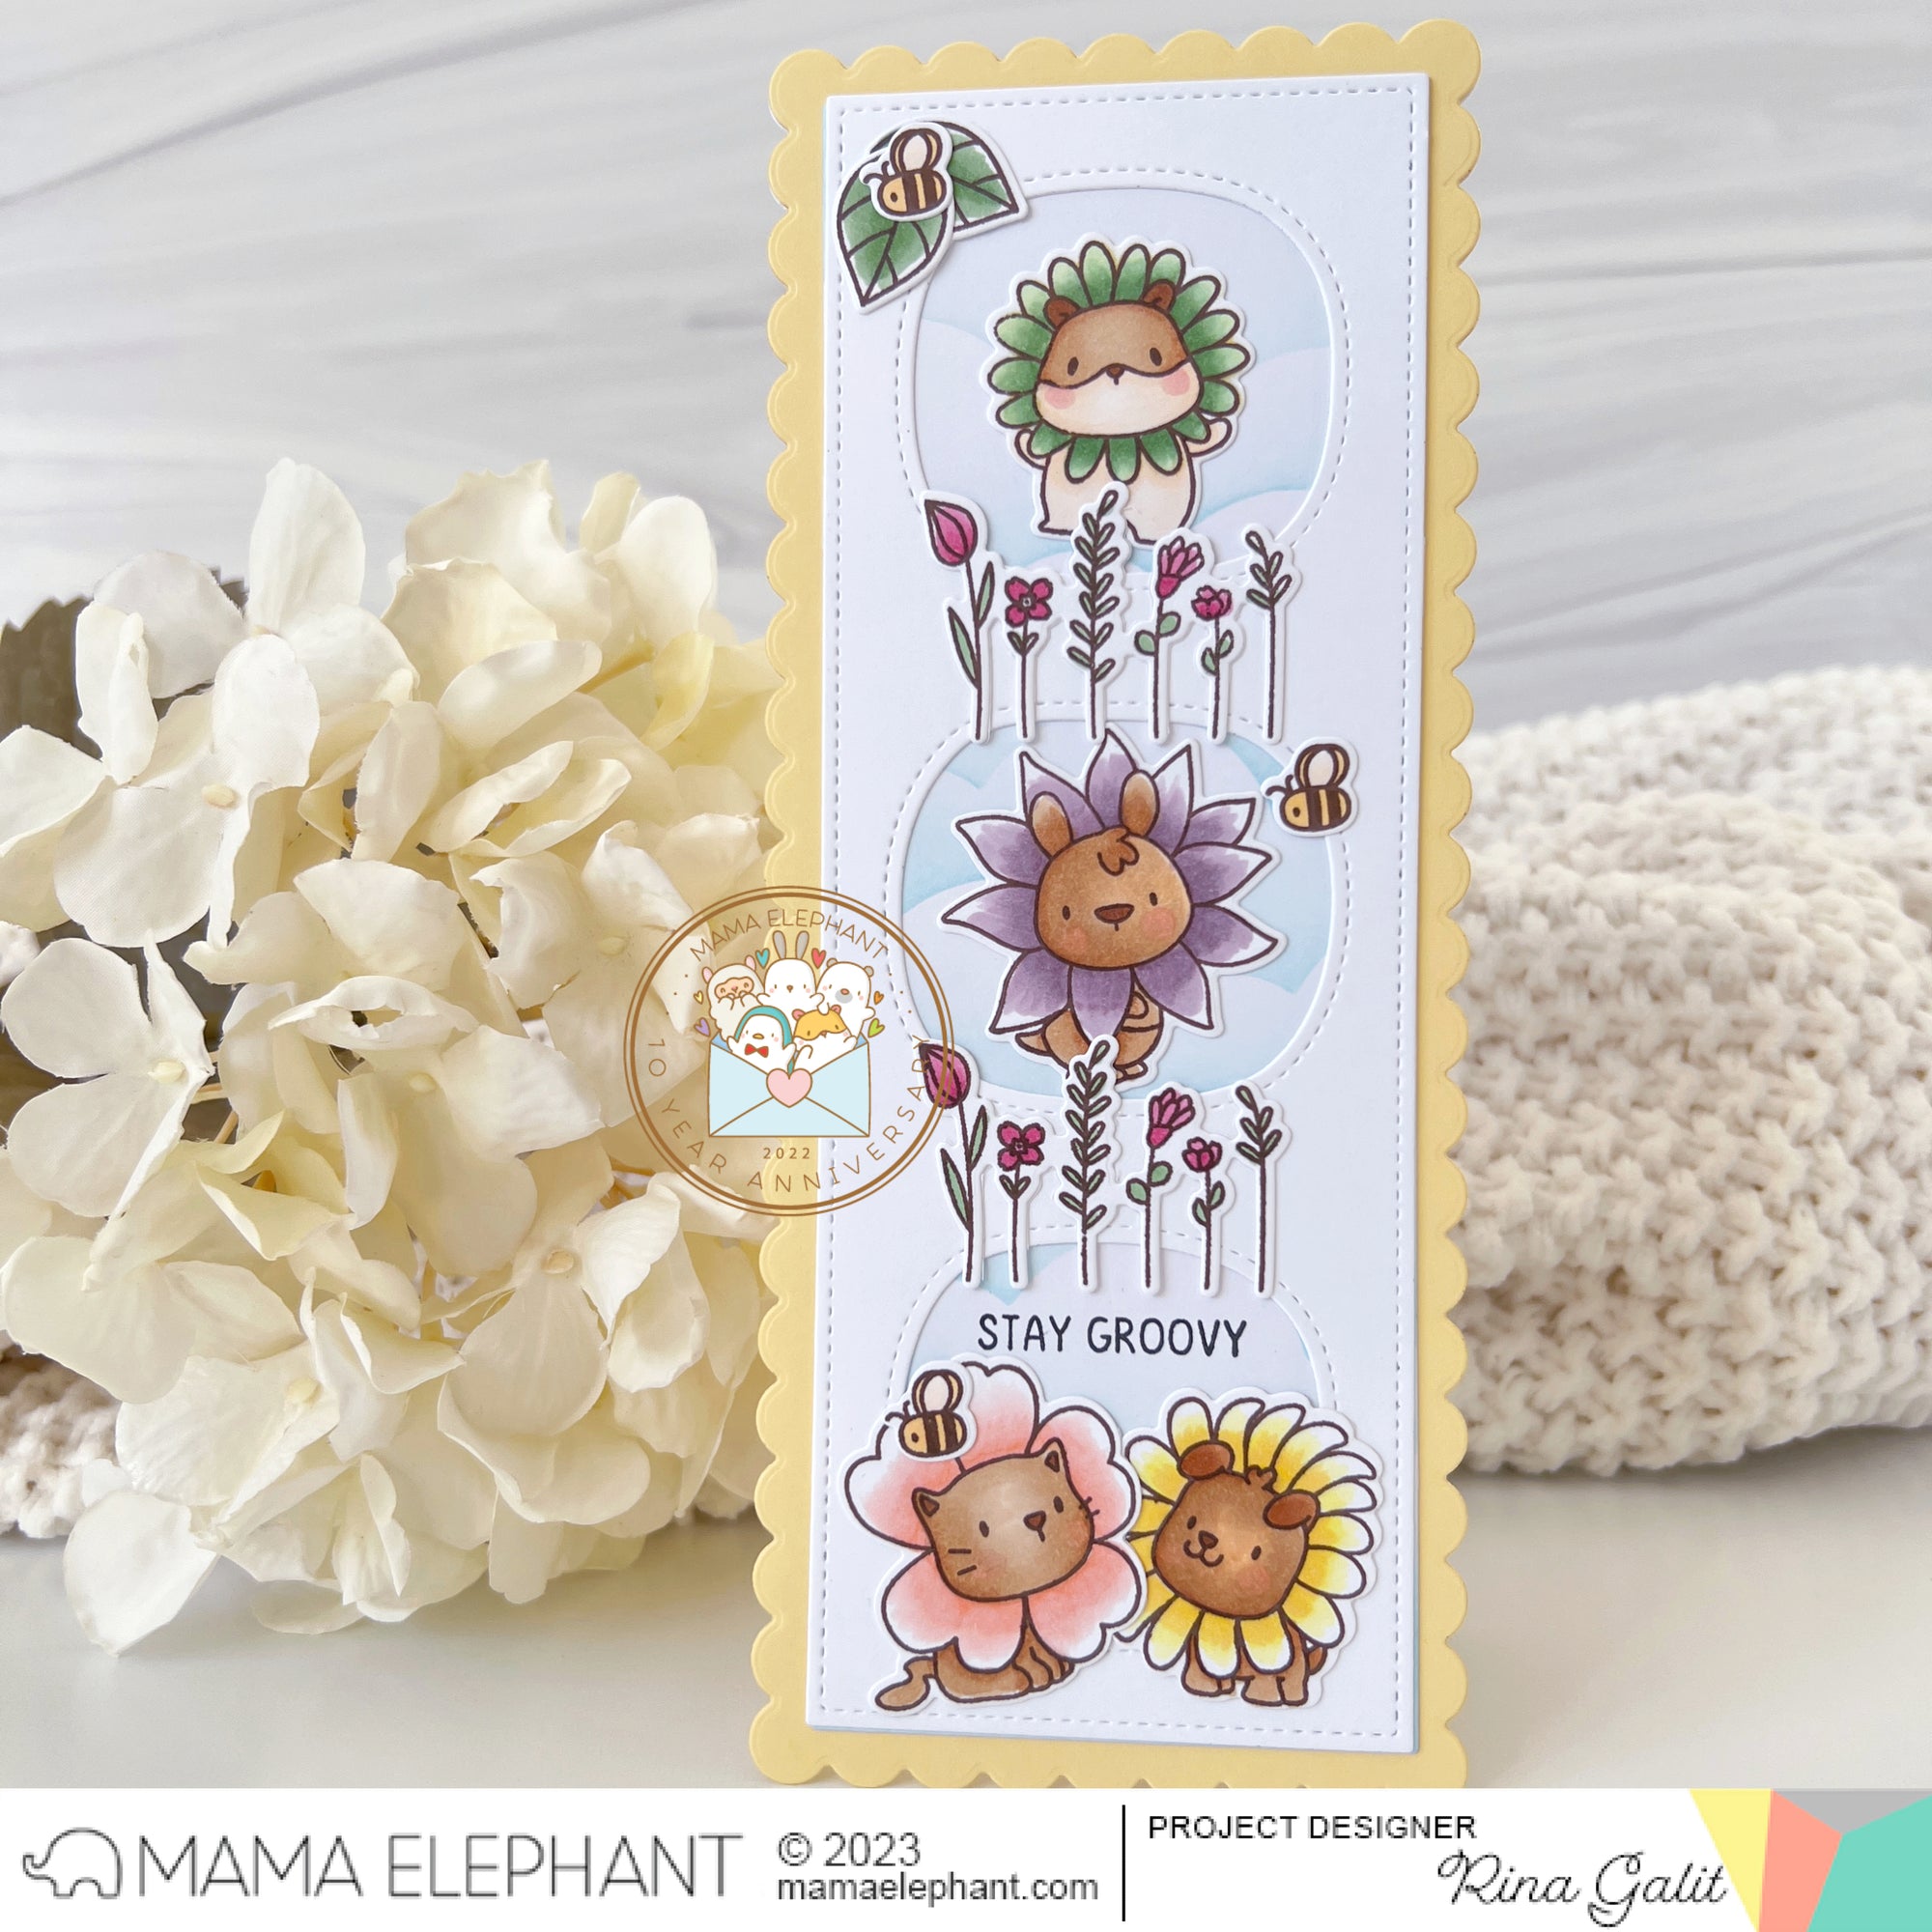 INTRODUCING: Flower Friends & Tulip Grid Cover